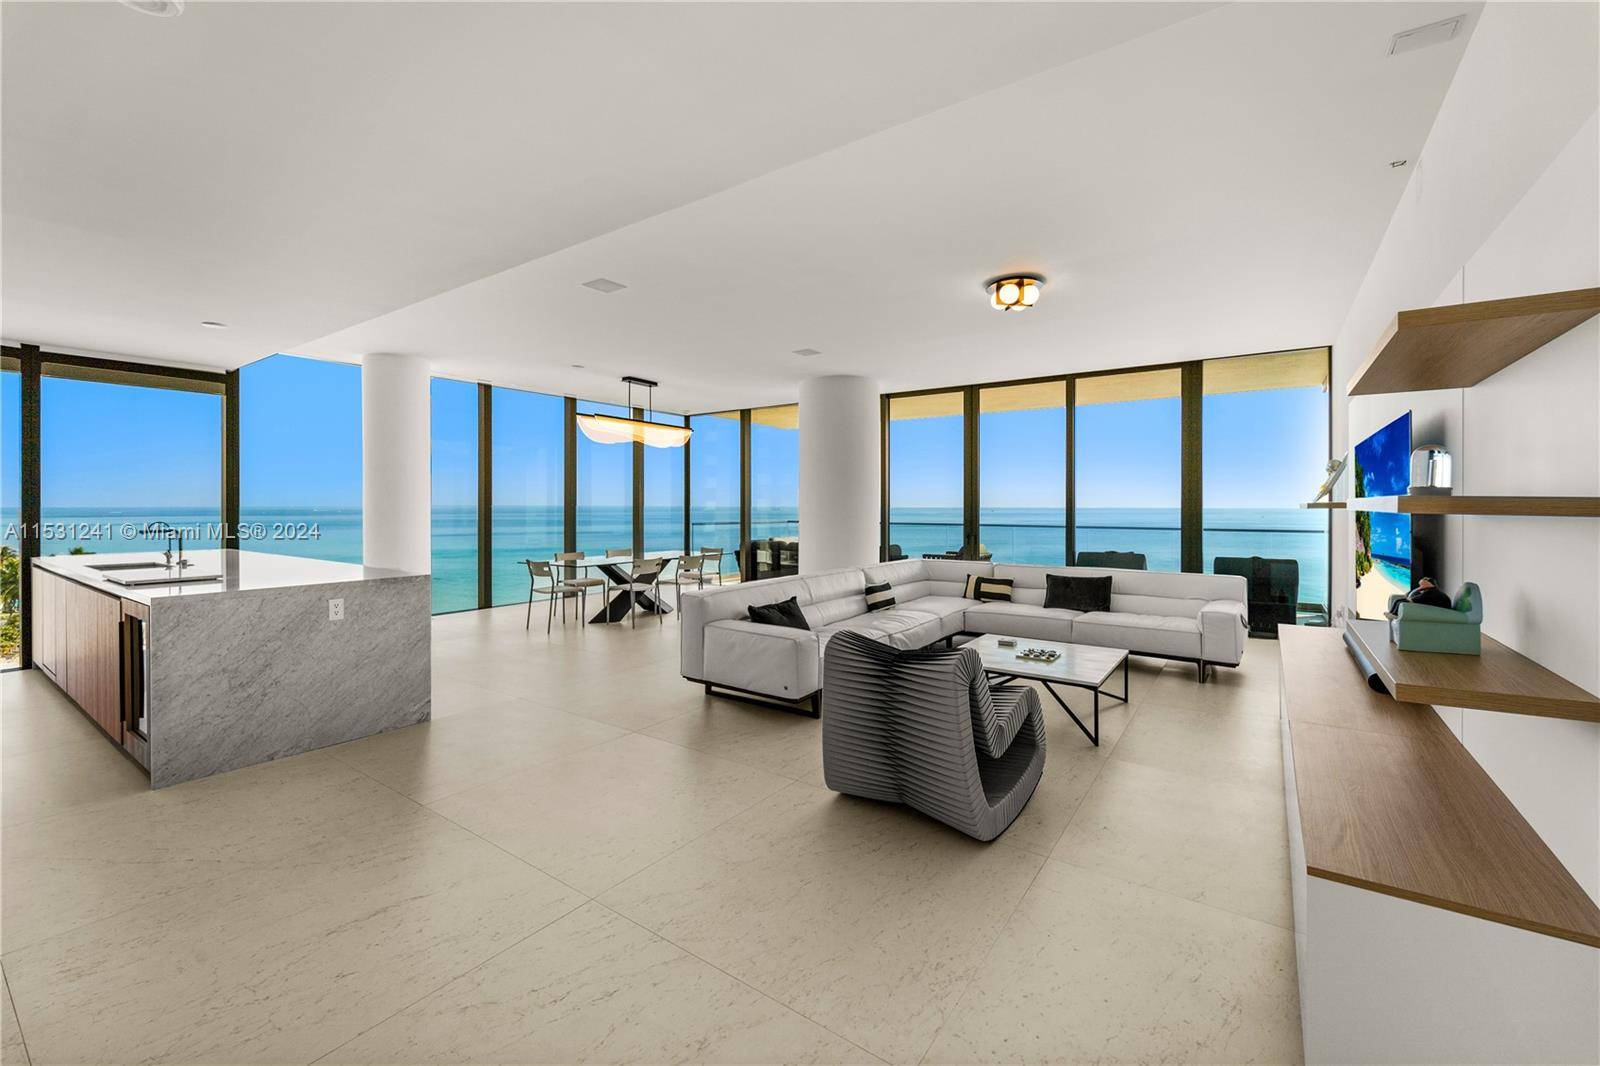 Incomparable oceanfront living at this furnished 3 bedroom plus den residence at the brand new 2000 Ocean.